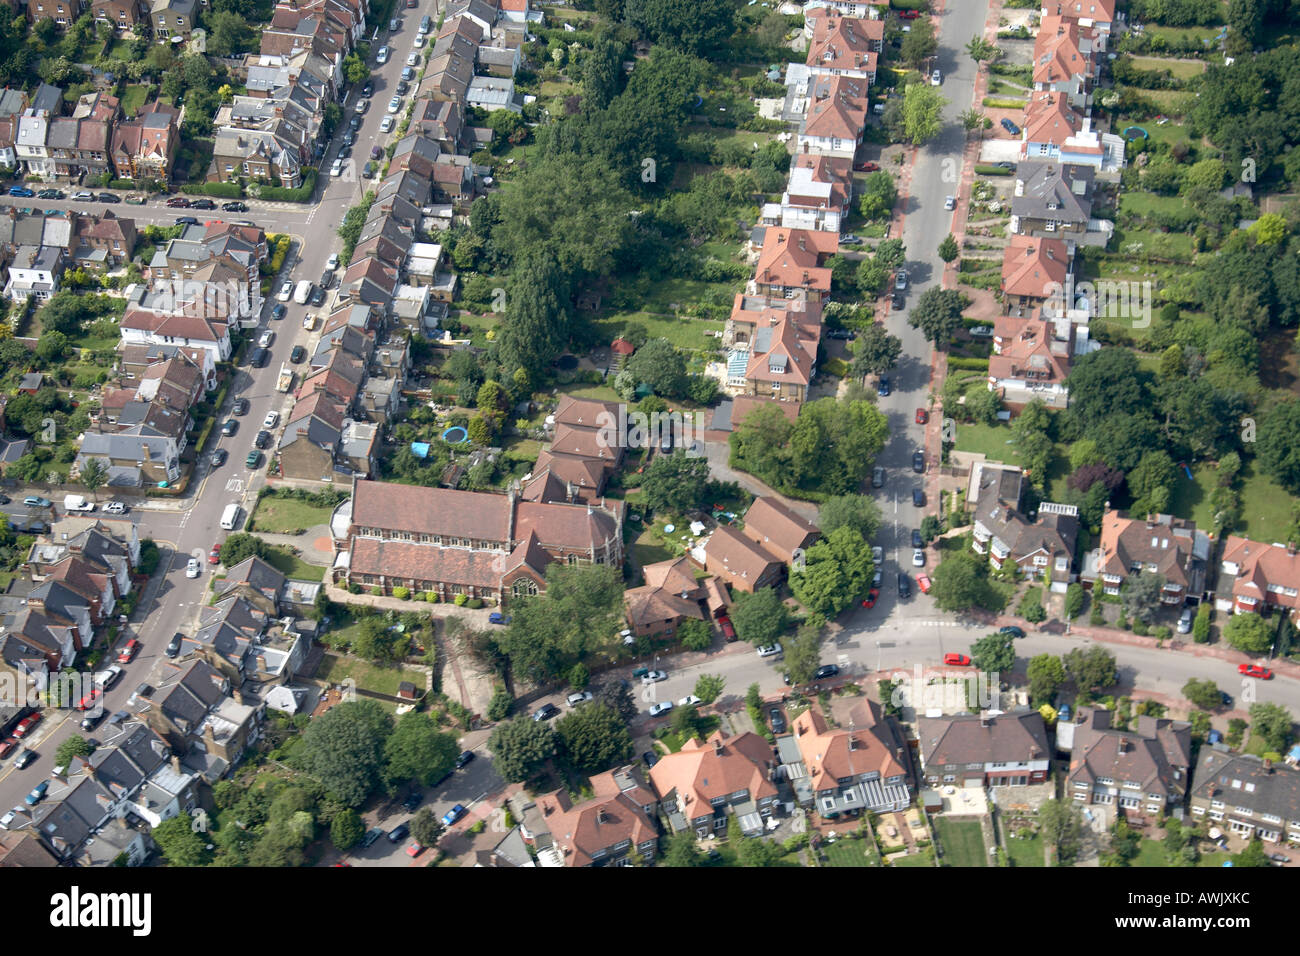 High level oblique aerial view north of All Saints Church Durham Road residential area East Finchley Barnet London N2 England UK Stock Photo